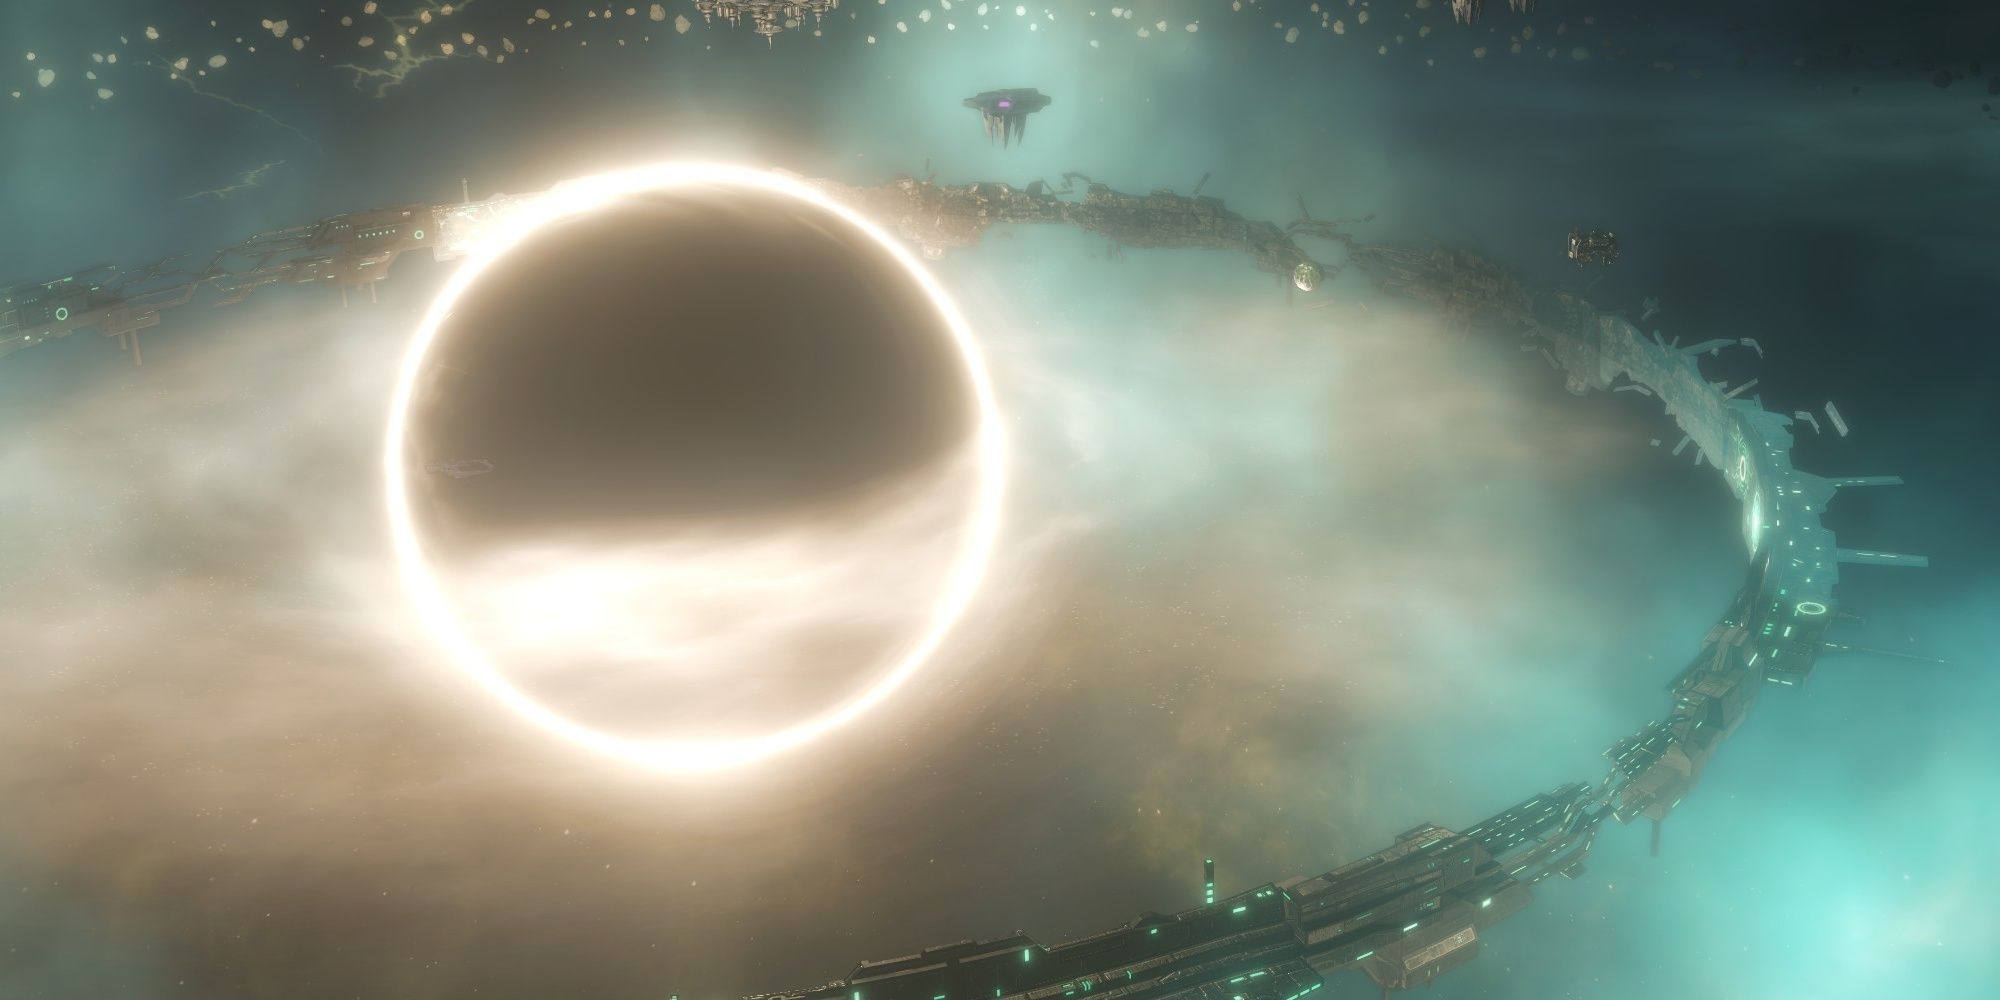 stellaris beginner tips feature image with dyson sphere